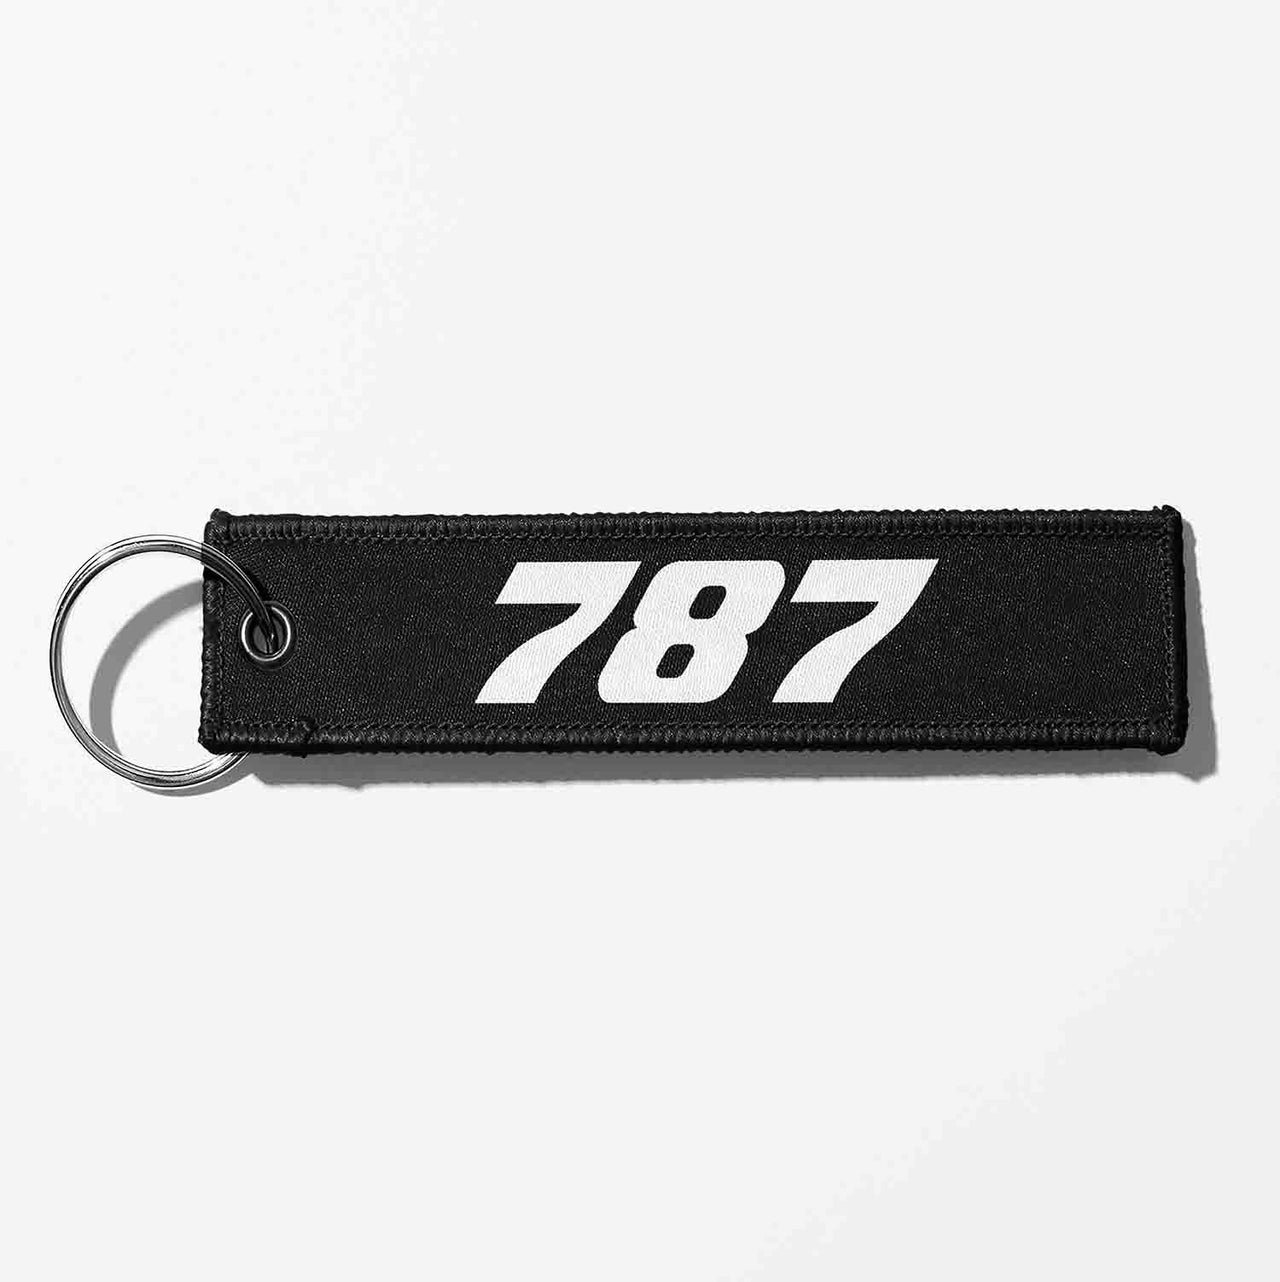 Boeing 787 Flat Text Designed Key Chains